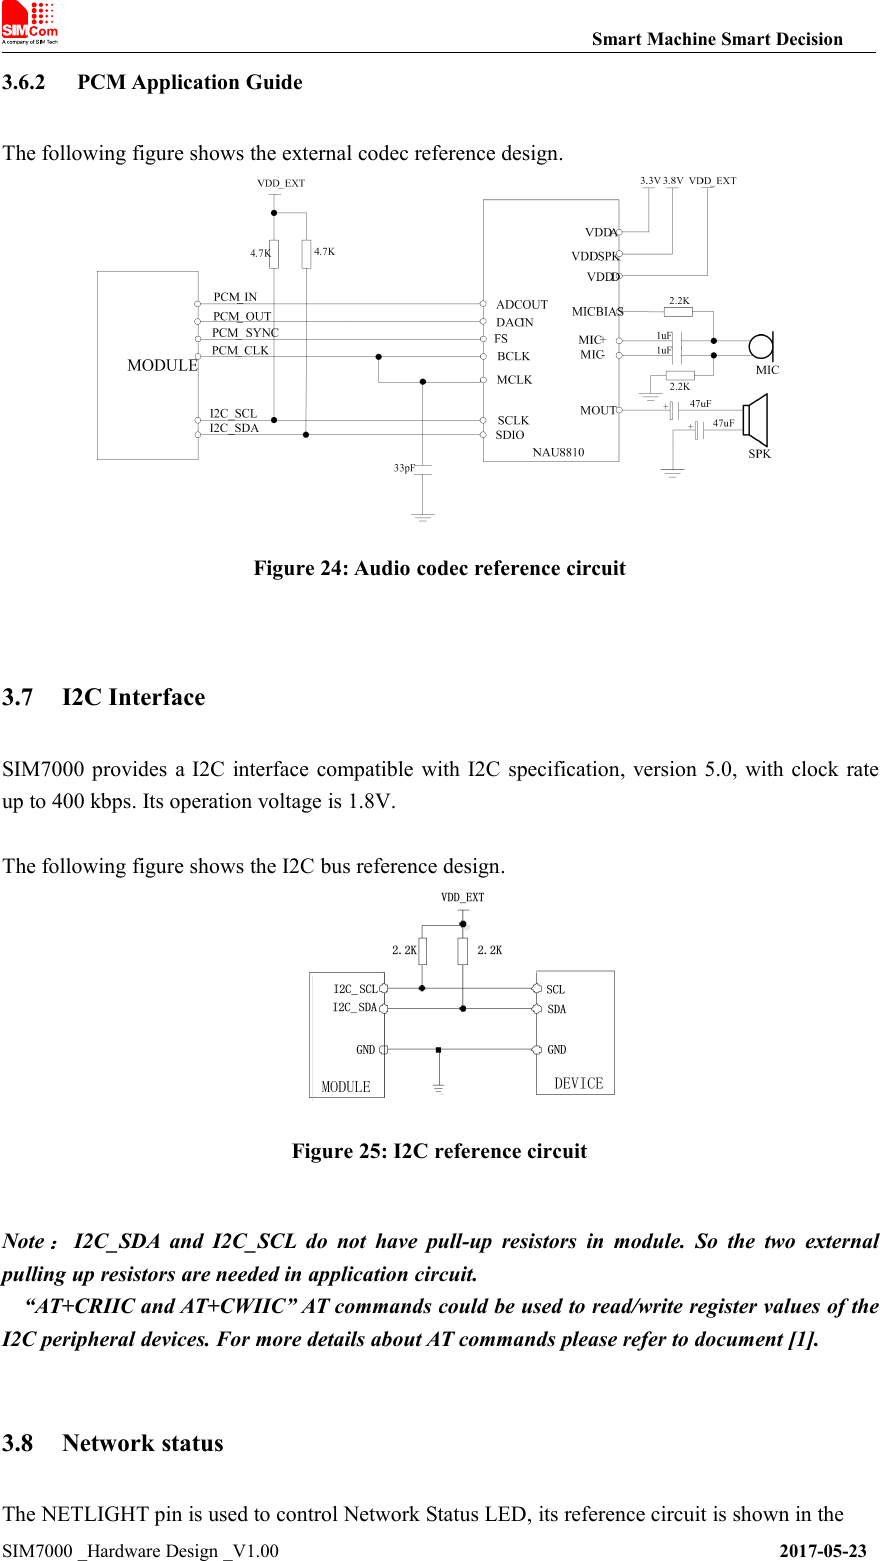 Smart Machine Smart DecisionSIM7000 _Hardware Design _V1.00 2017-05-233.6.2 PCM Application GuideThe following figure shows the external codec reference design.Figure 24: Audio codec reference circuit3.7 I2C InterfaceSIM7000 provides a I2C interface compatible with I2C specification, version 5.0, with clock rateup to 400 kbps. Its operation voltage is 1.8V.The following figure shows the I2C bus reference design.Figure 25: I2C reference circuitNote：I2C_SDA and I2C_SCL do not have pull-up resistors in module. So the two externalpulling up resistors are needed in application circuit.“AT+CRIIC and AT+CWIIC” AT commands could be used to read/write register values of theI2C peripheral devices. For more details about AT commands please refer to document [1].3.8 Network statusThe NETLIGHT pin is used to control Network Status LED, its reference circuit is shown in the